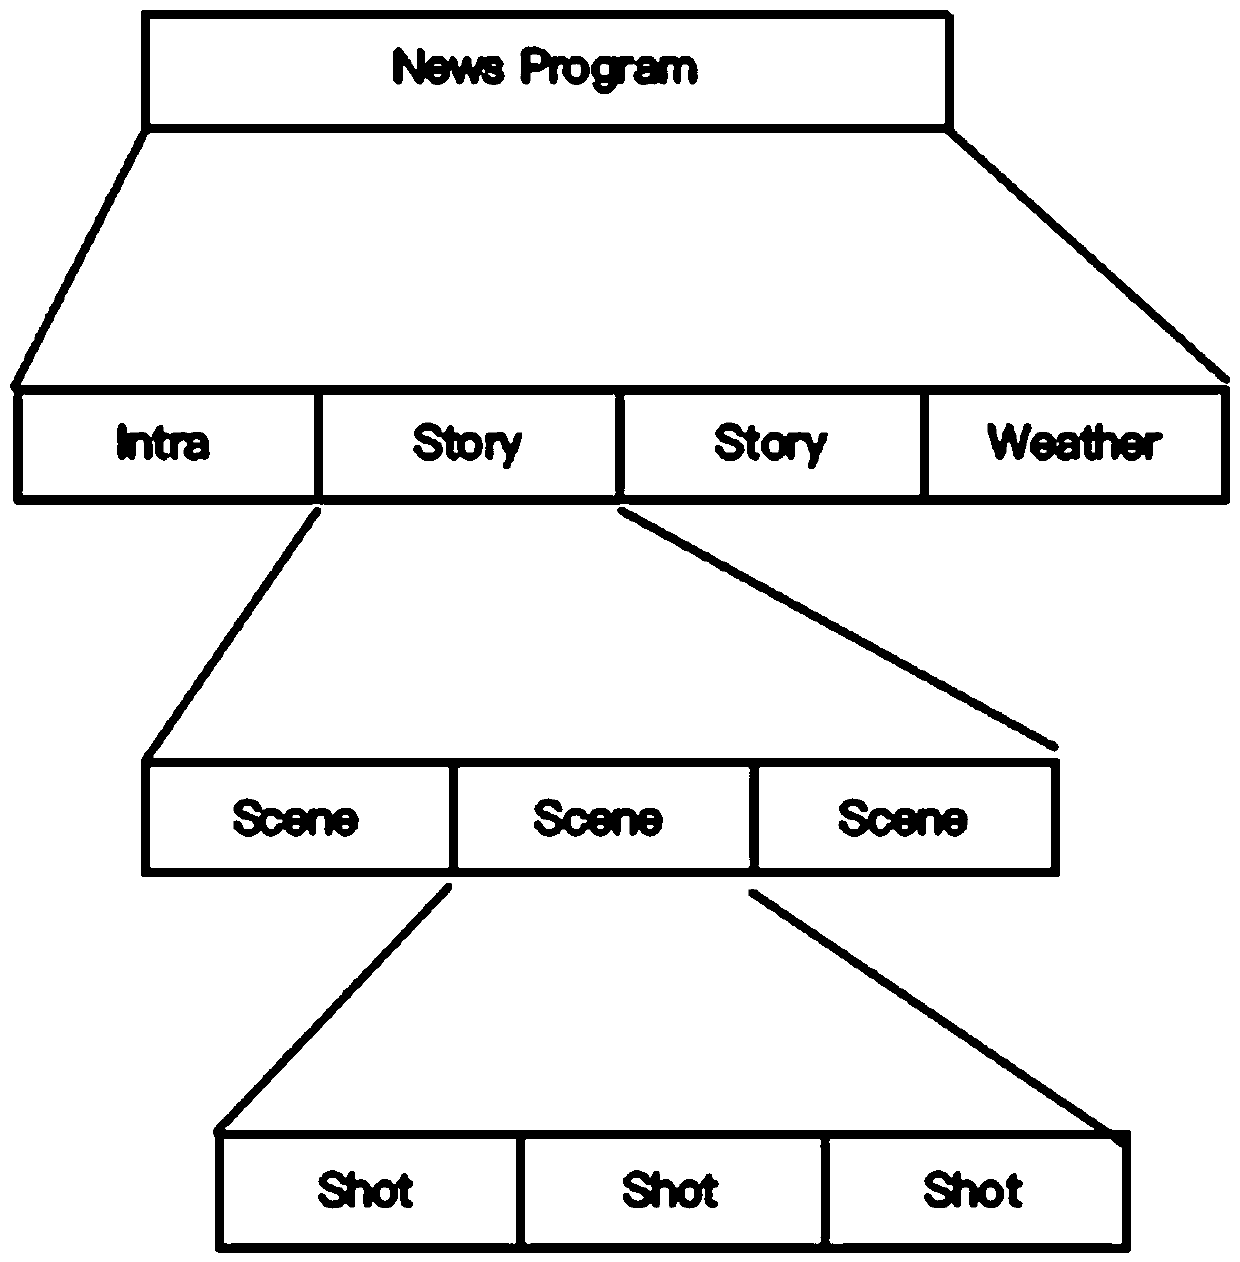 An End-to-End Structured Method for News Programs